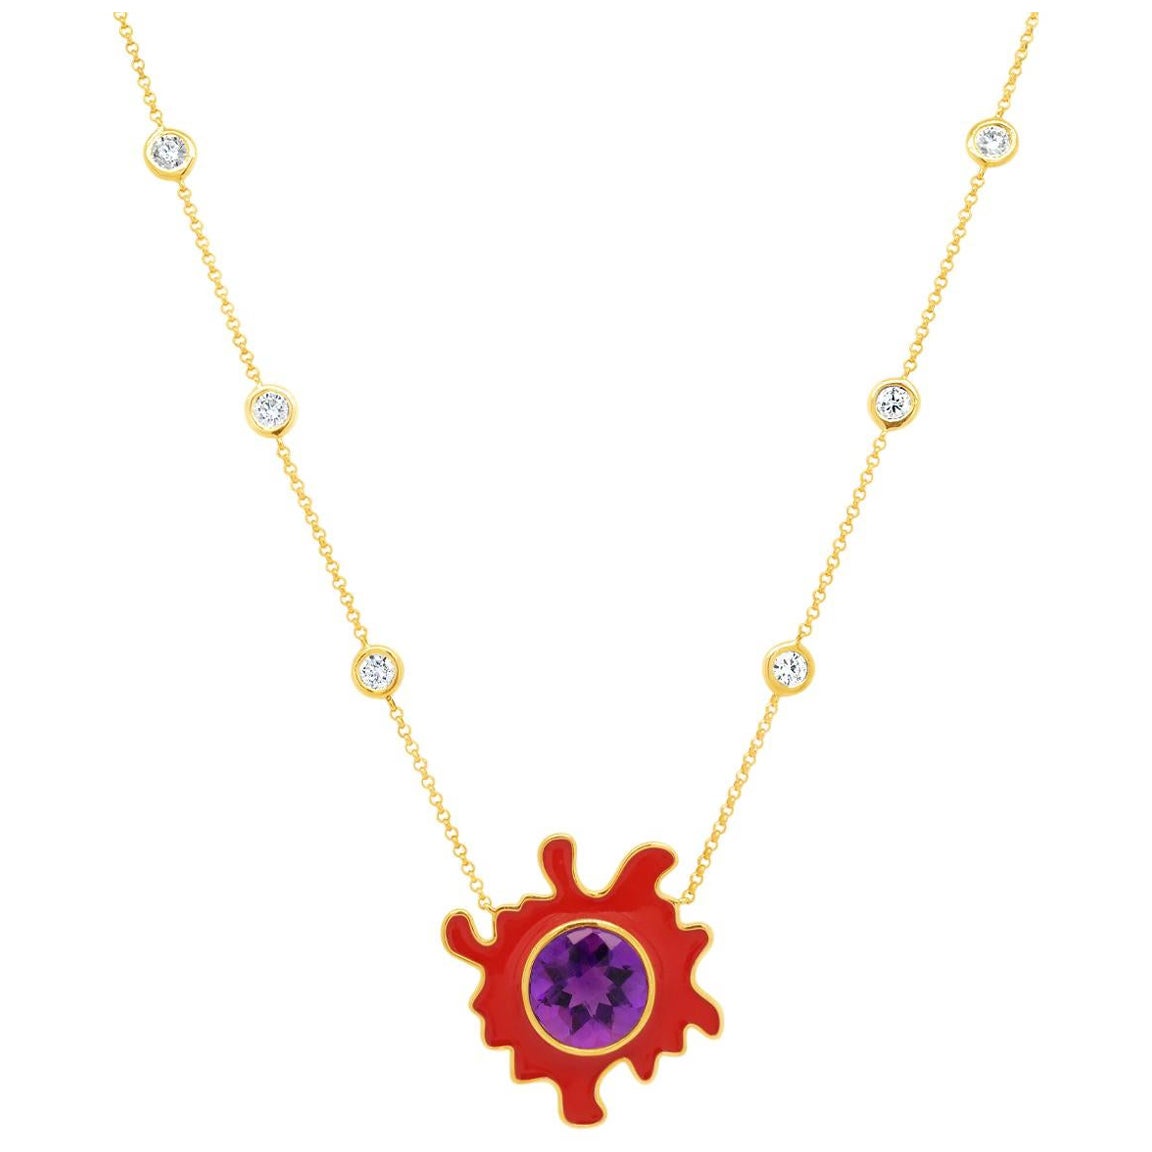 Psychedelic Solitaire Necklace 4.6GMS 3.54CTW Amethyst and Tomato Enamel For Sale